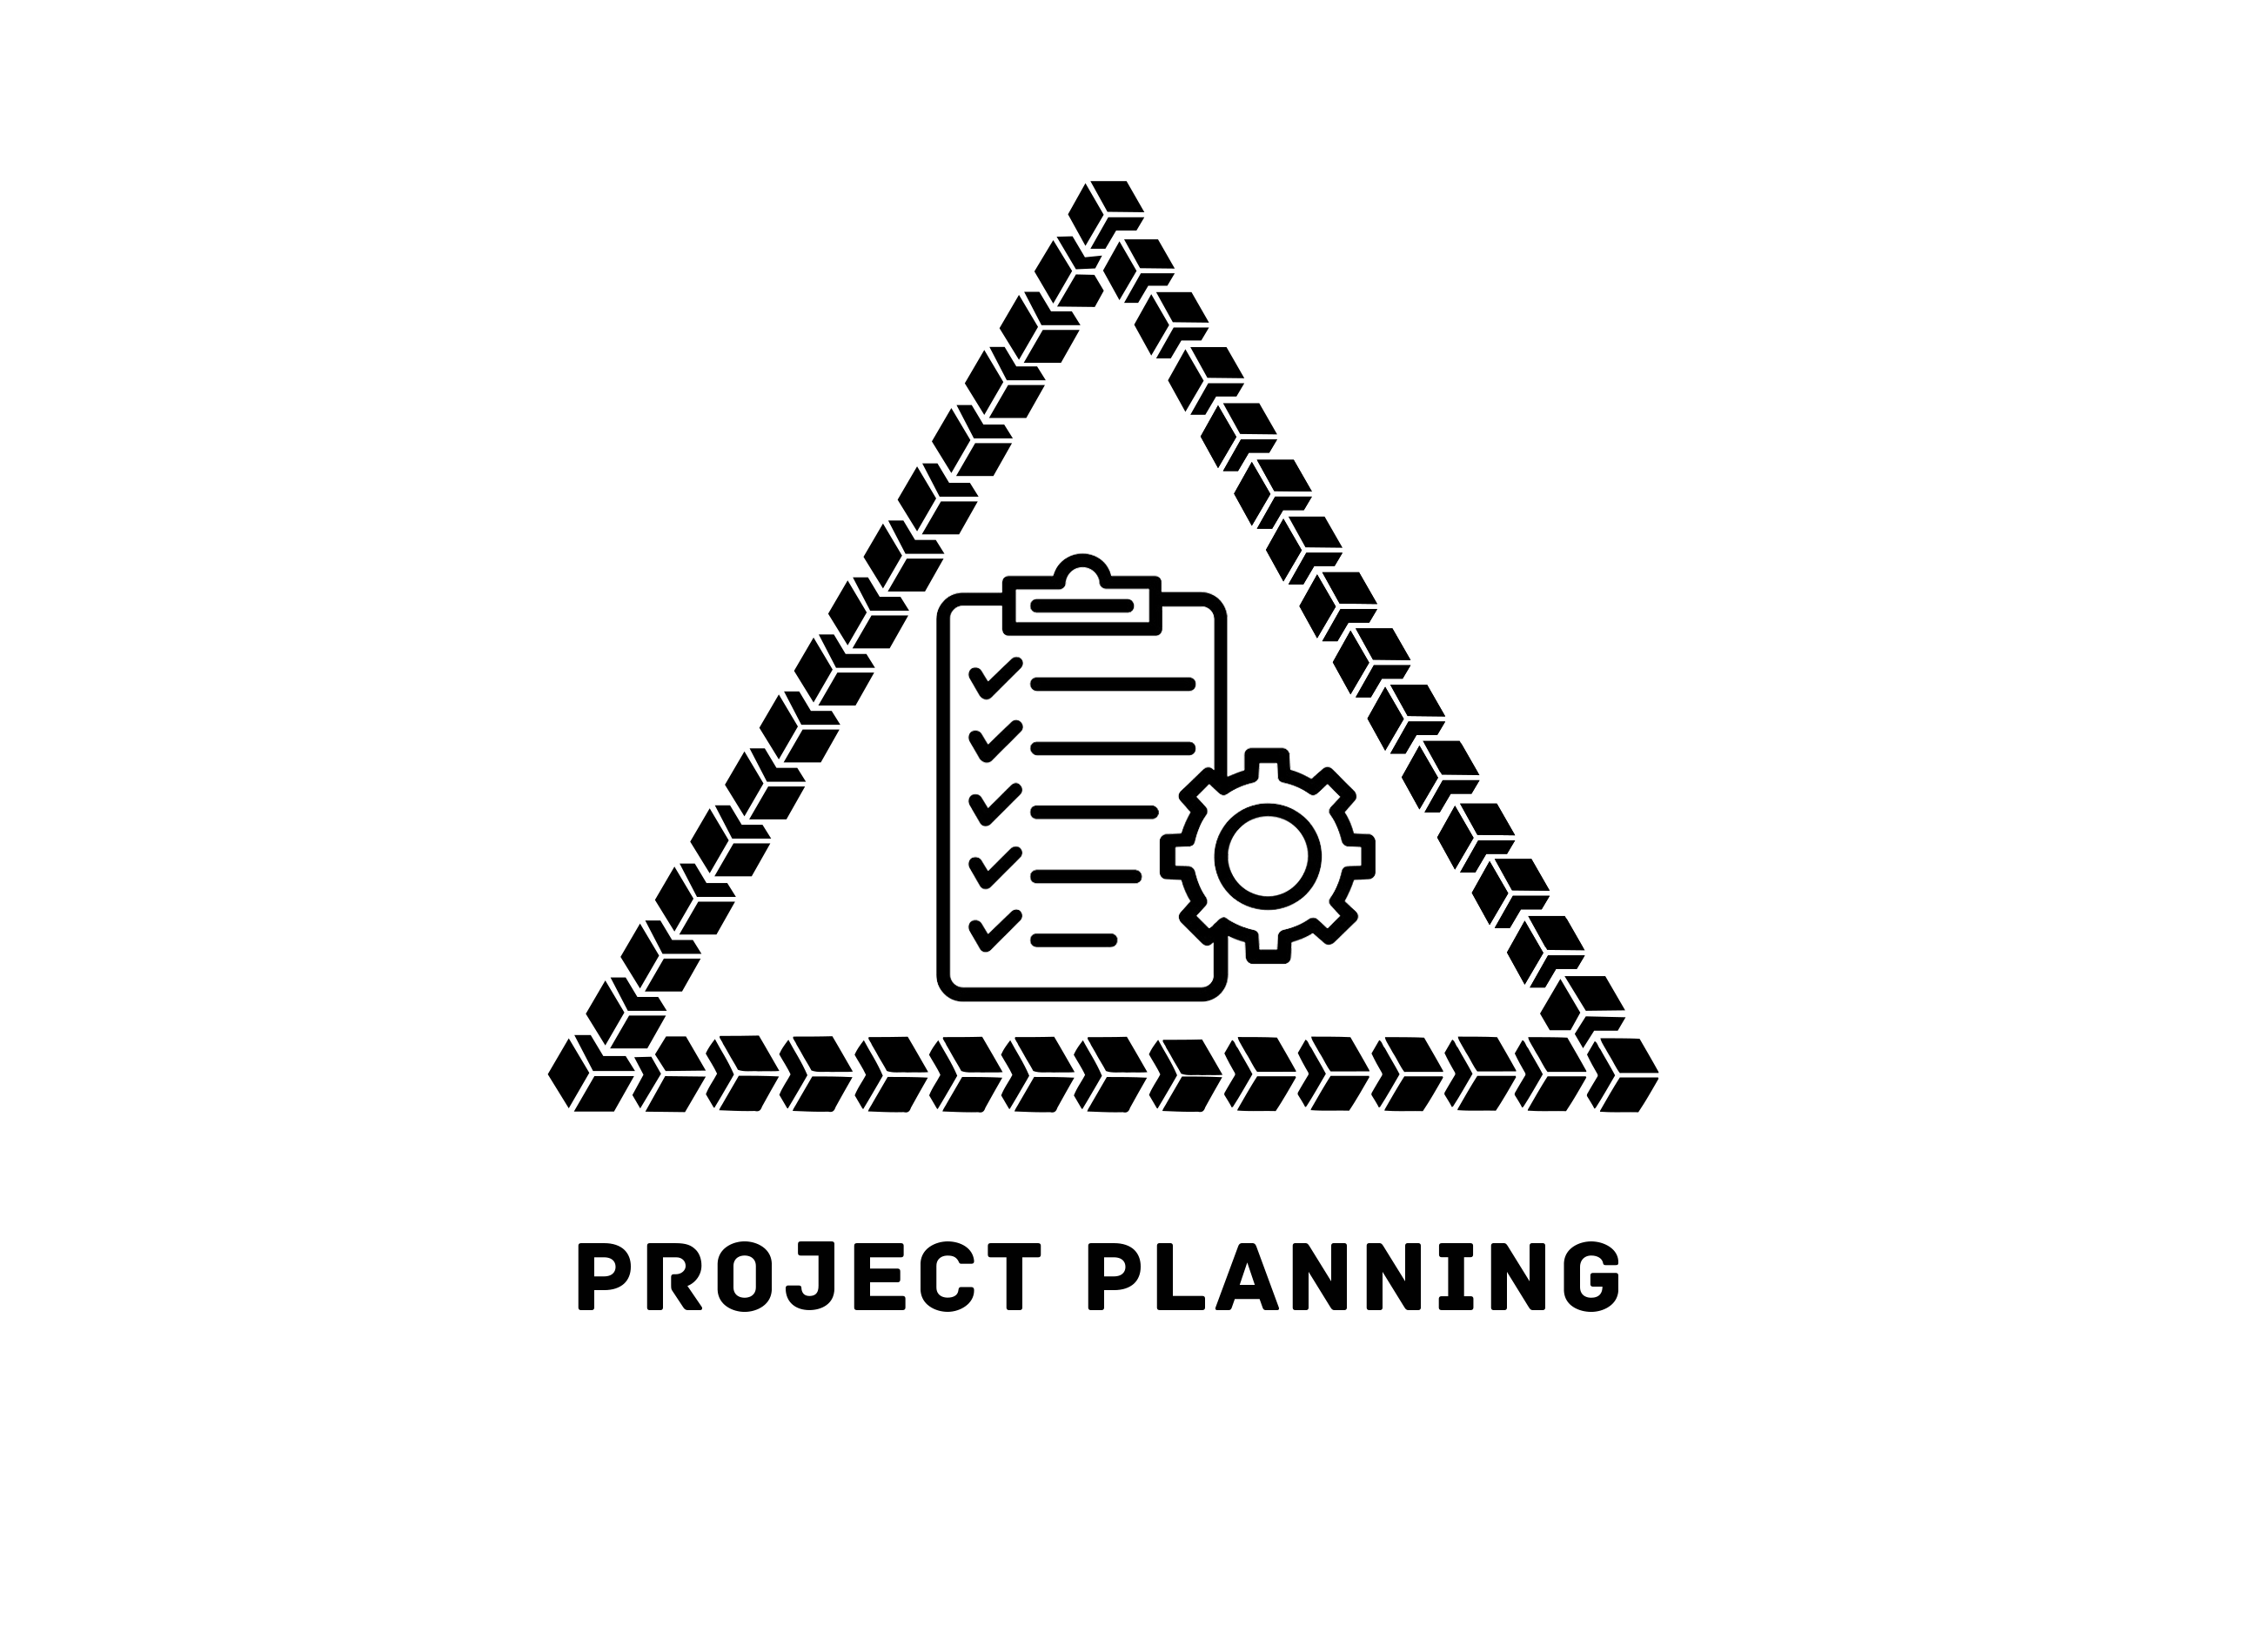 PROJECT PLANNING